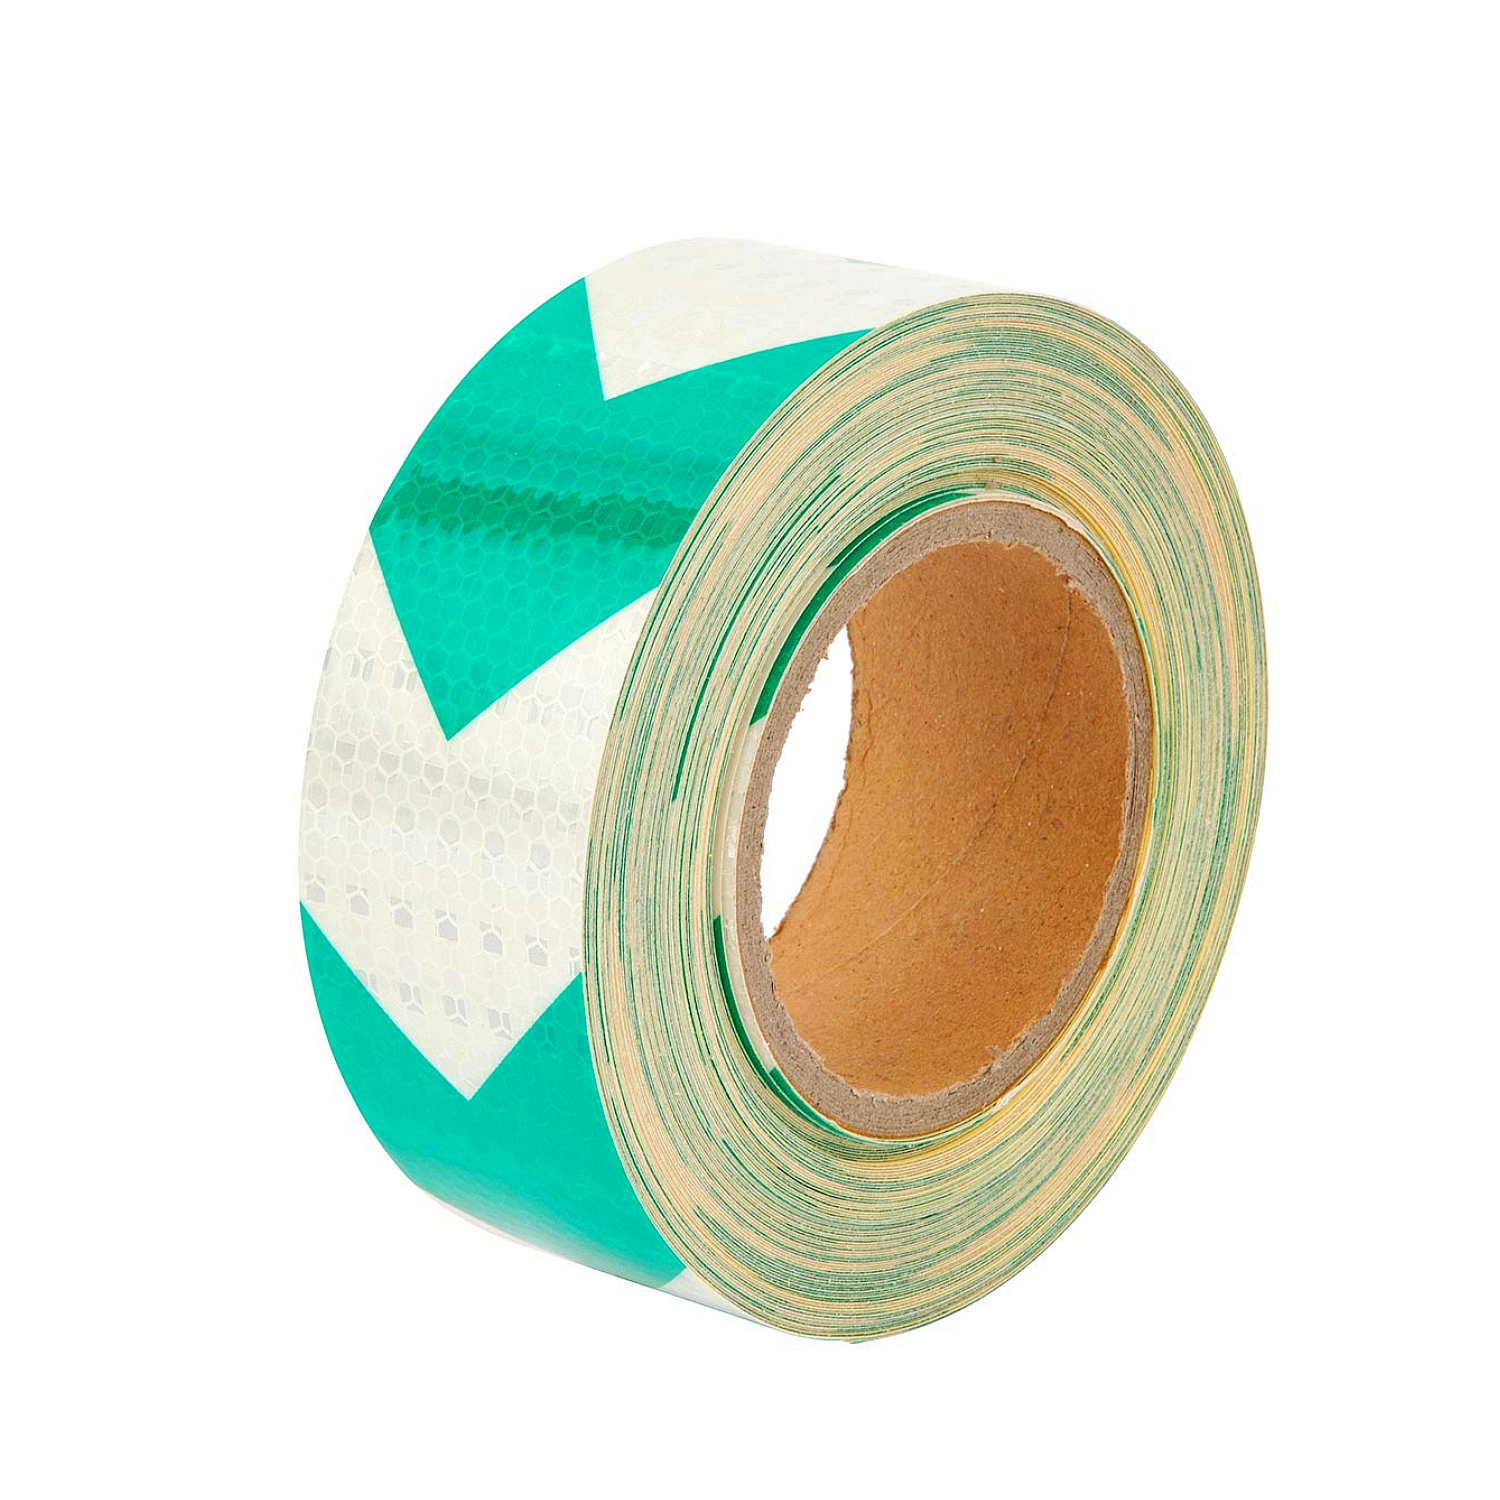 Waterproof Self-Adhesive PVC Arrow Reflective Safety Warning Tape for Trucks